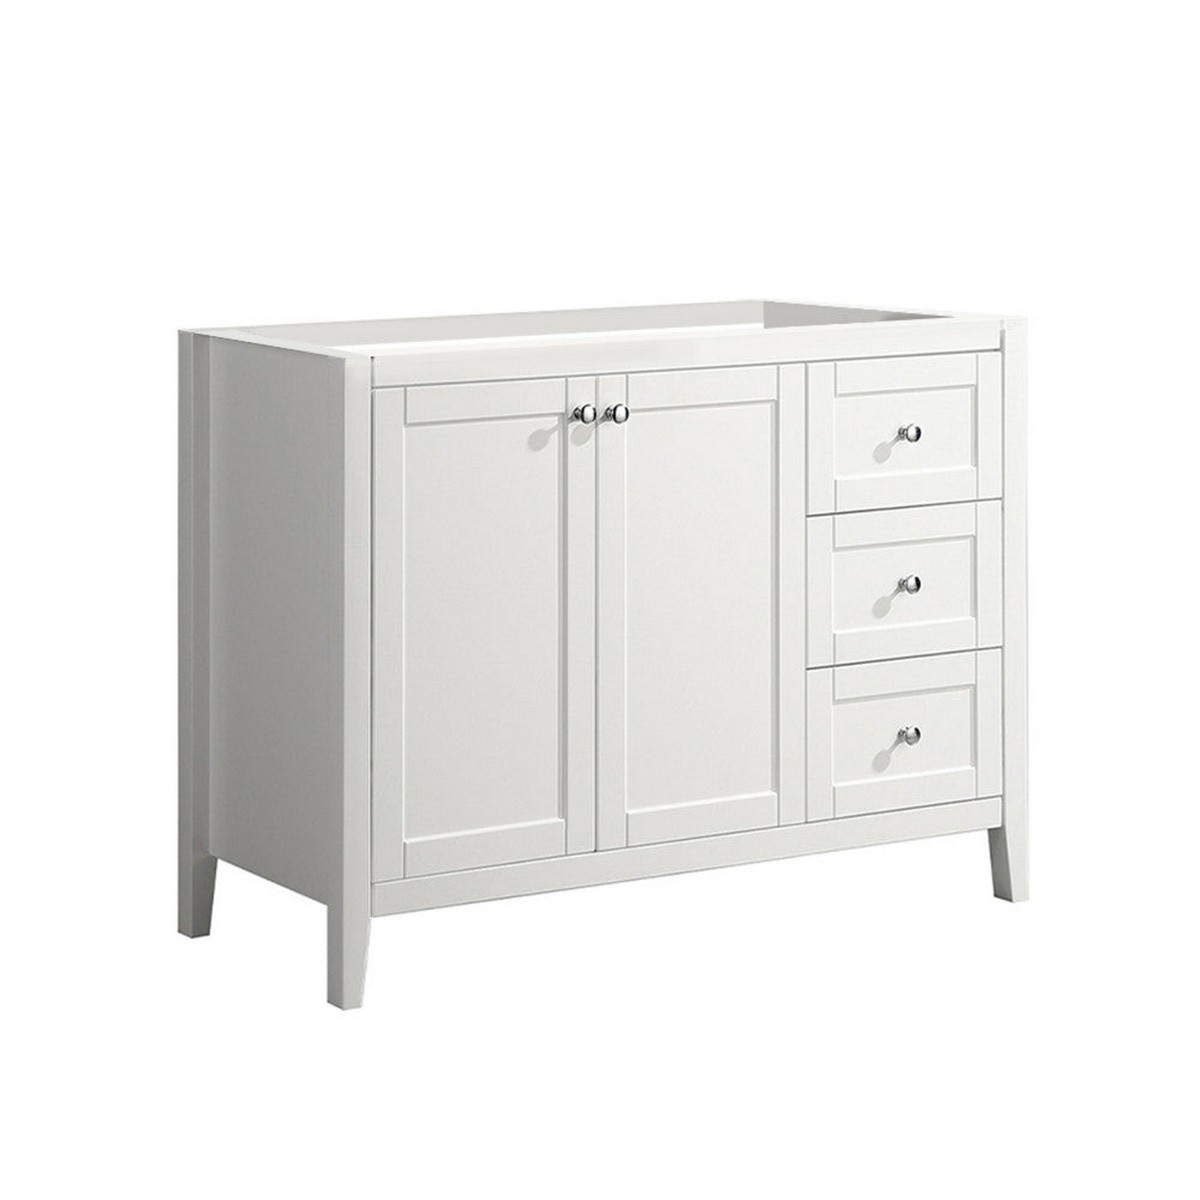 SWISS MADISON SM-BV414-C CANNES 46 7/8 INCH FREESTANDING SINGLE SINK BATHROOM VANITY CABINET ONLY IN WHITE